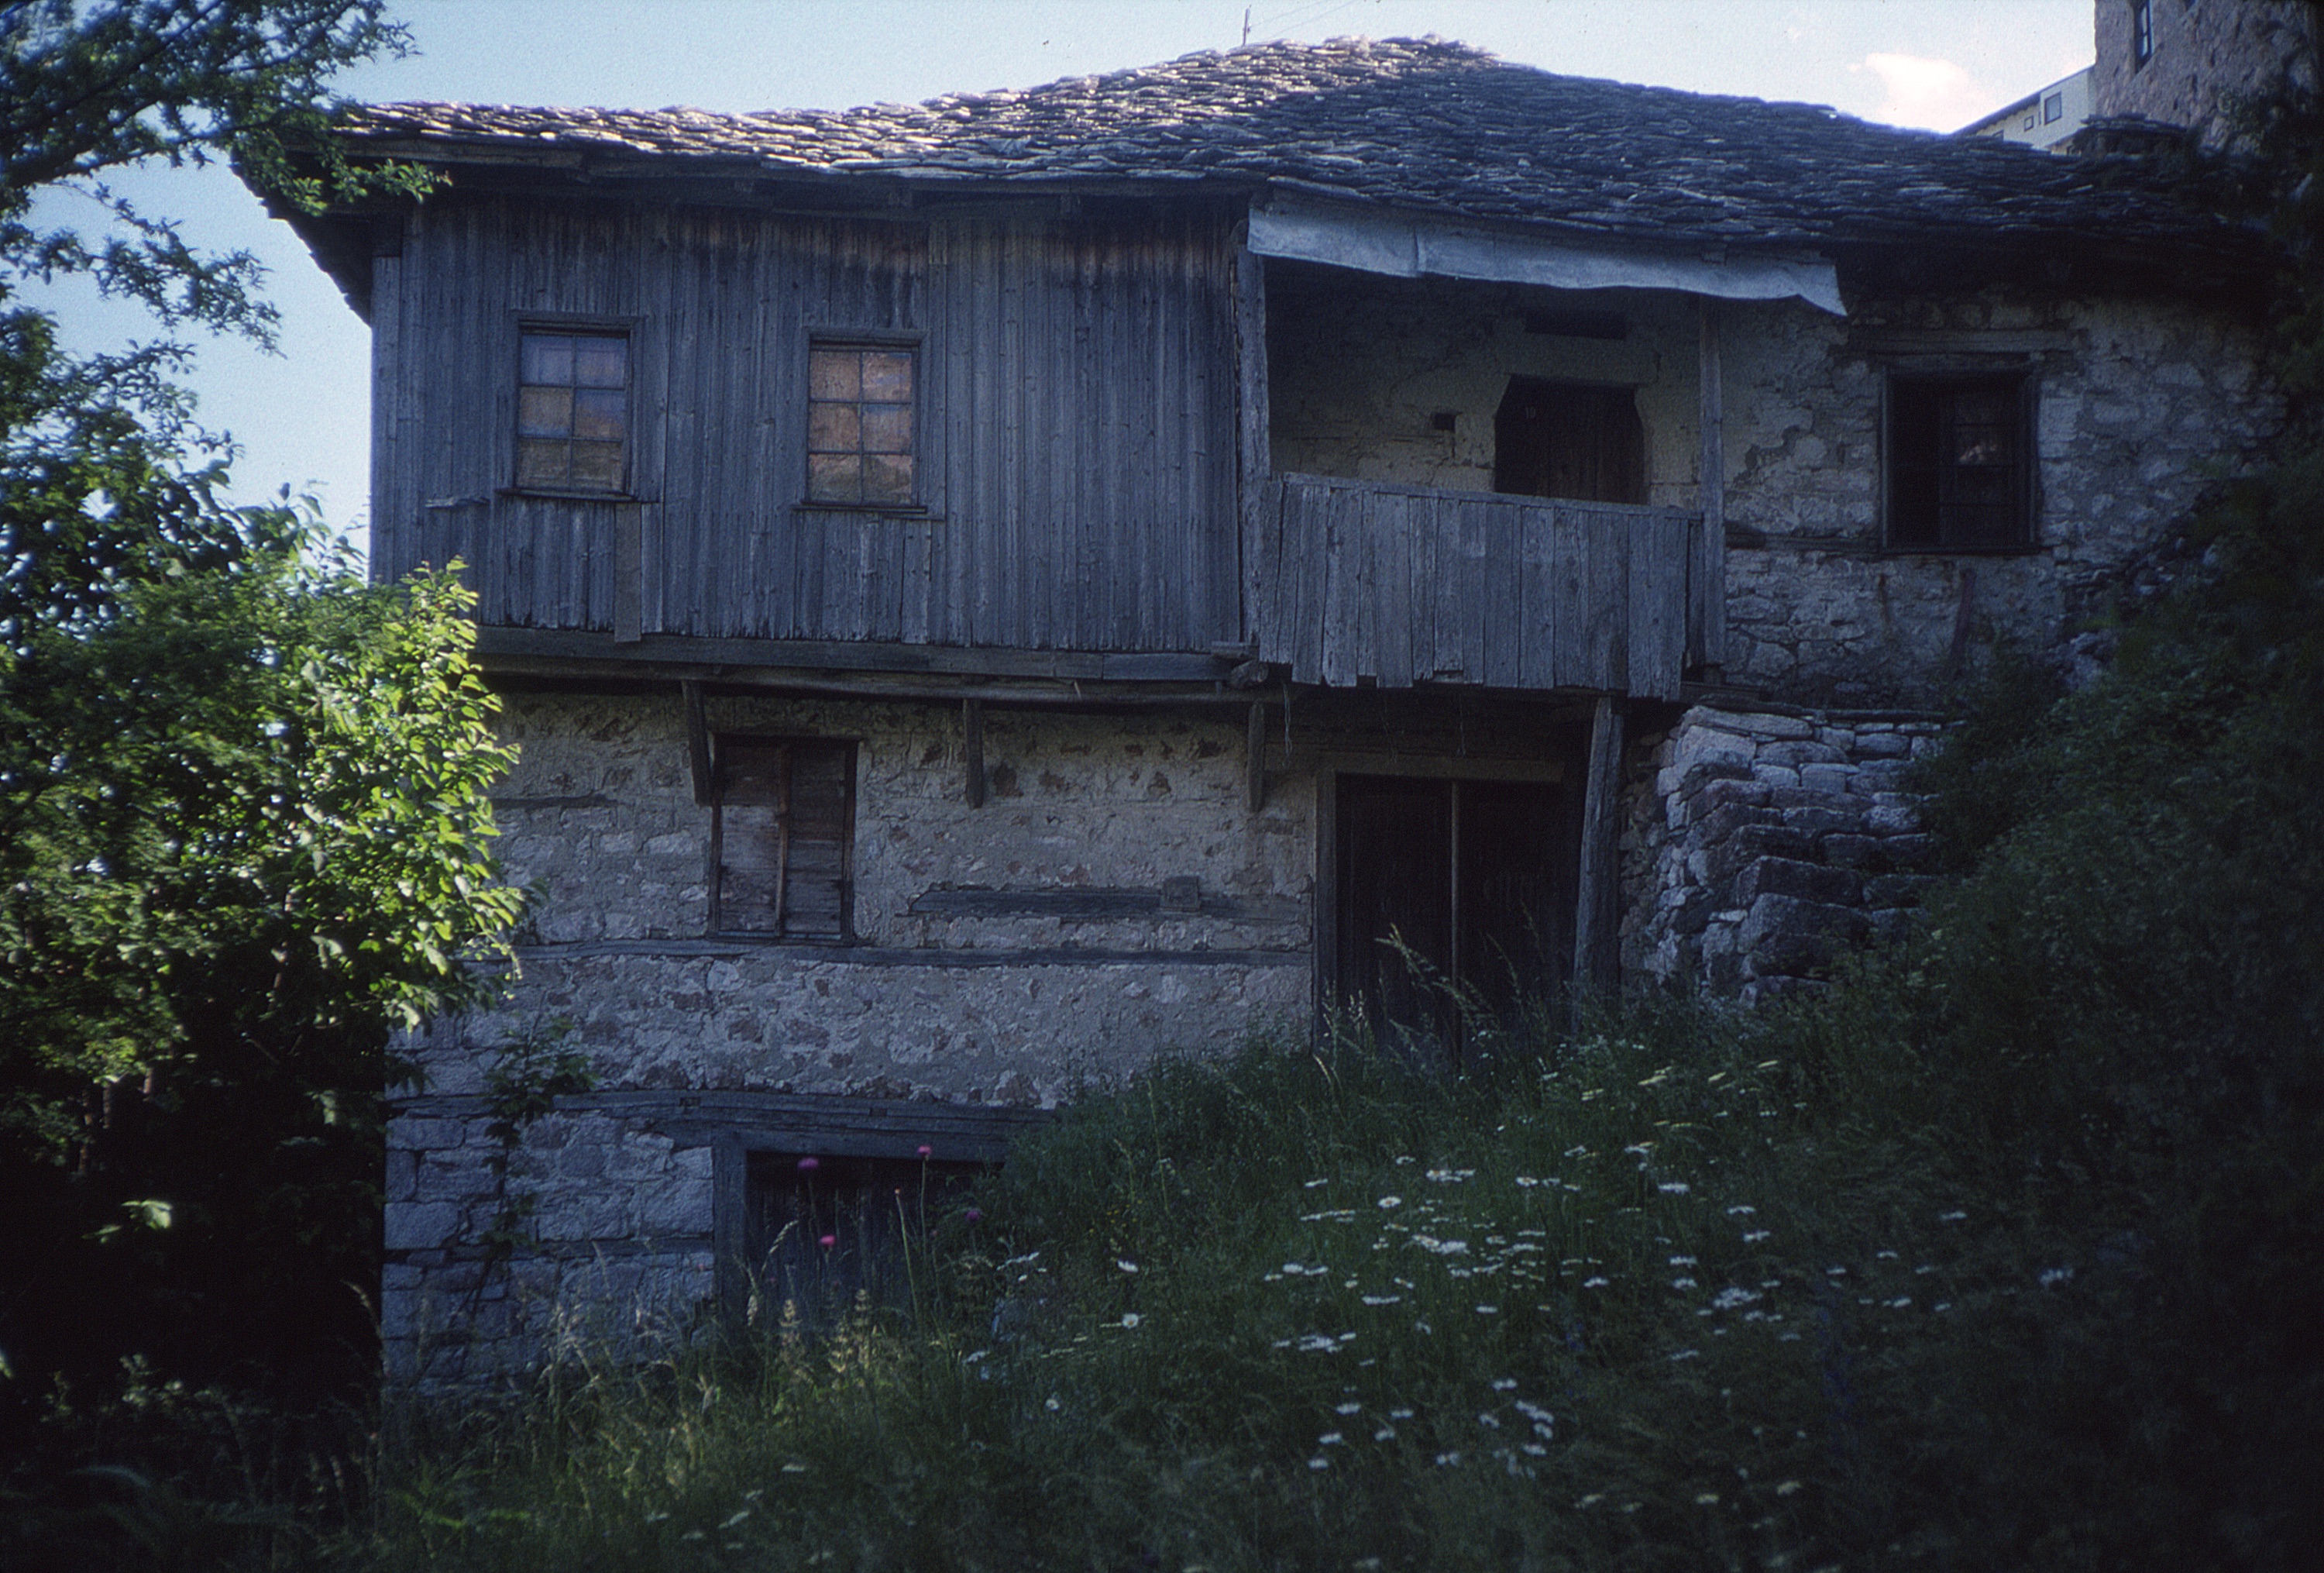 <p>This dwelling shows the shifting of stones and vulnerability of these structures in these highlands. It has the basic three levels with exterior access for each level. The window and door openings have wooden lintels except at the uppermost level where dressed stones form the opening for the entry door.</p>